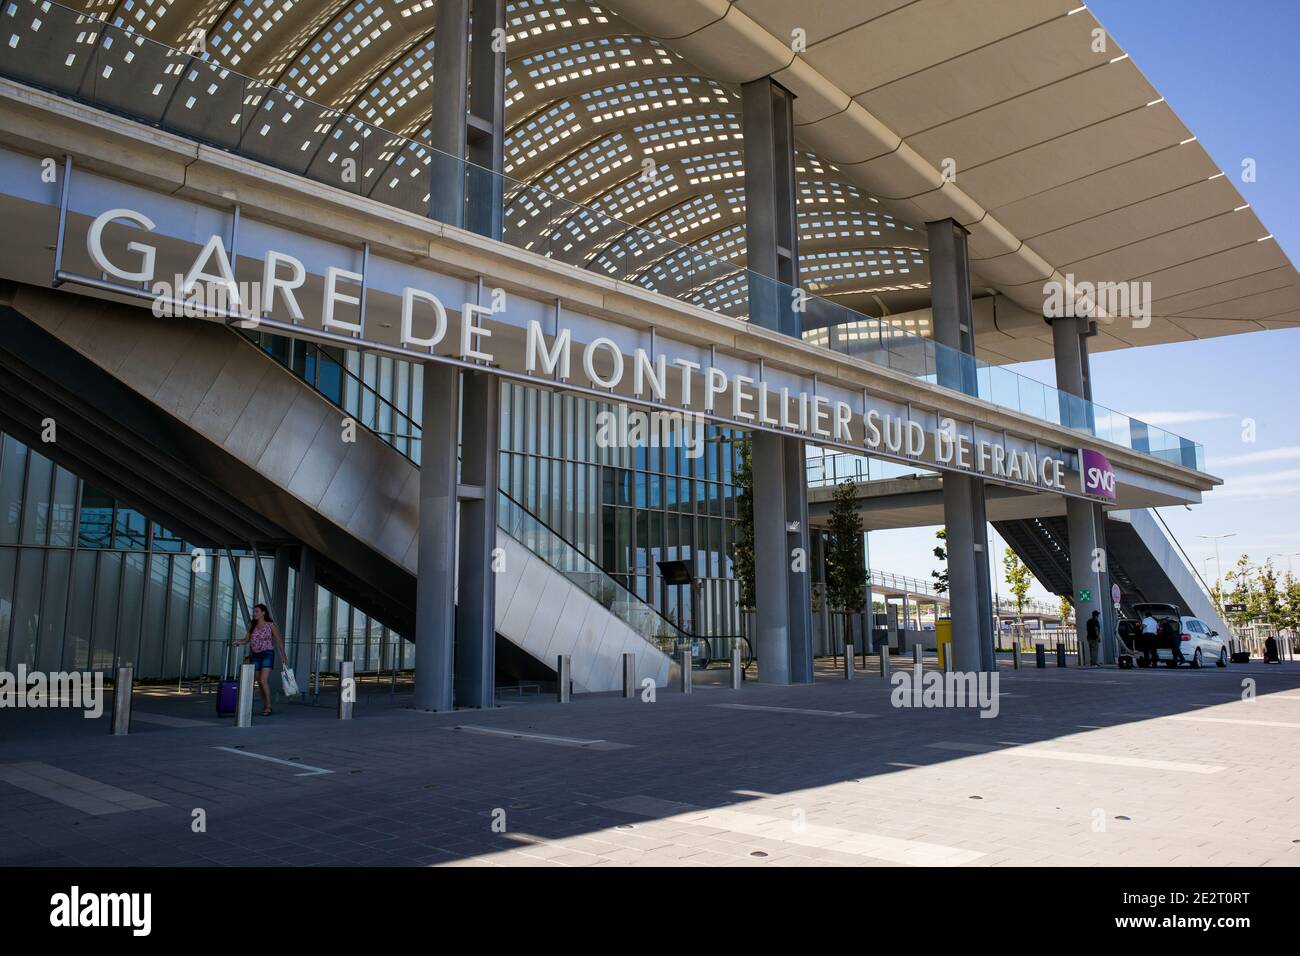 Montpellier (south of France): Montpellier Sud de France Railway Station Stock Photo